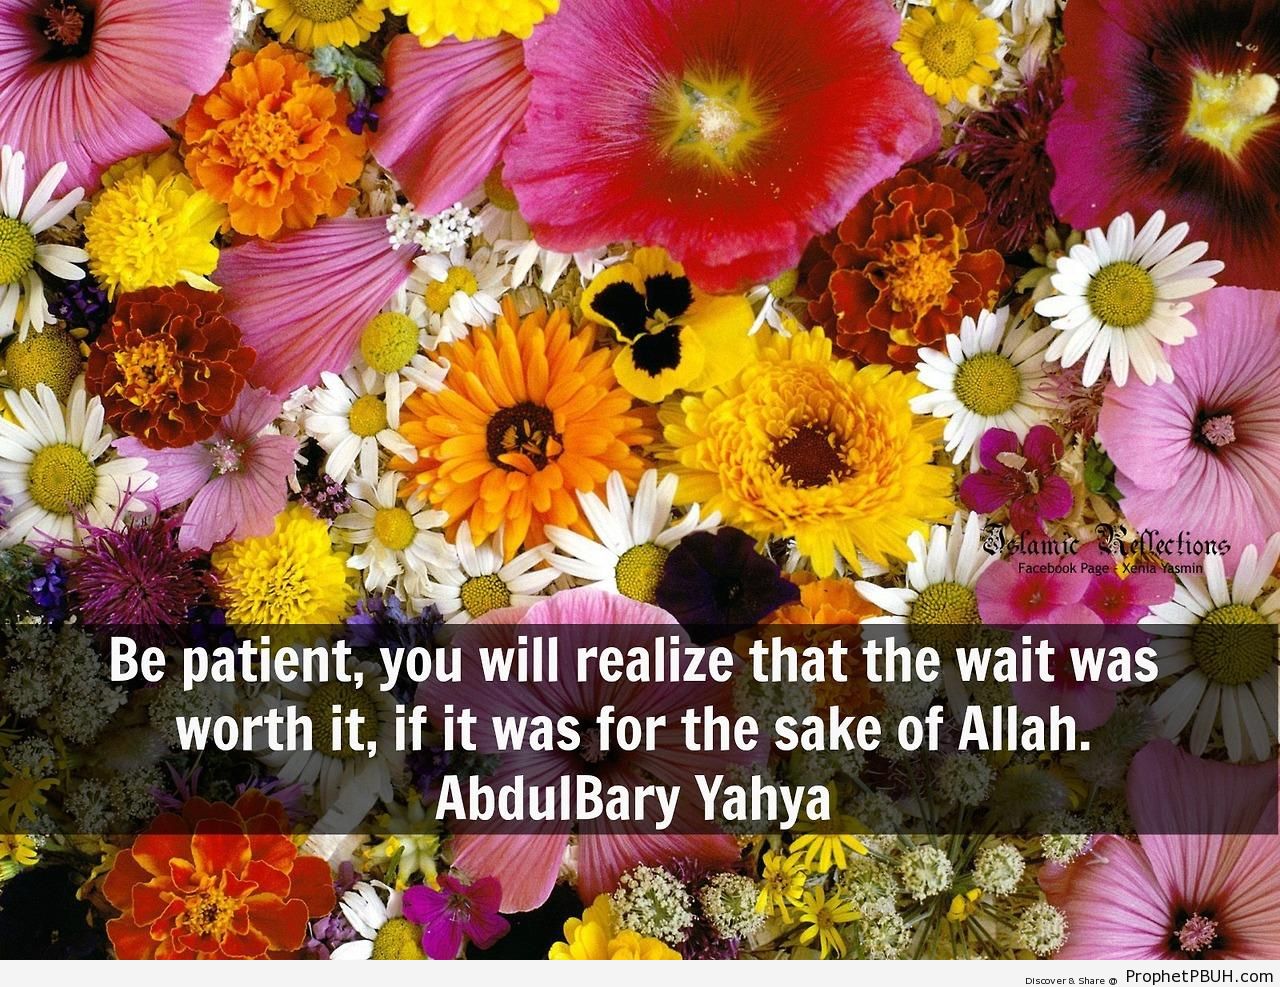 Abdulbary Yahya Quote- Be patient, you will realize& - Abdulbary Yahya Quotes 